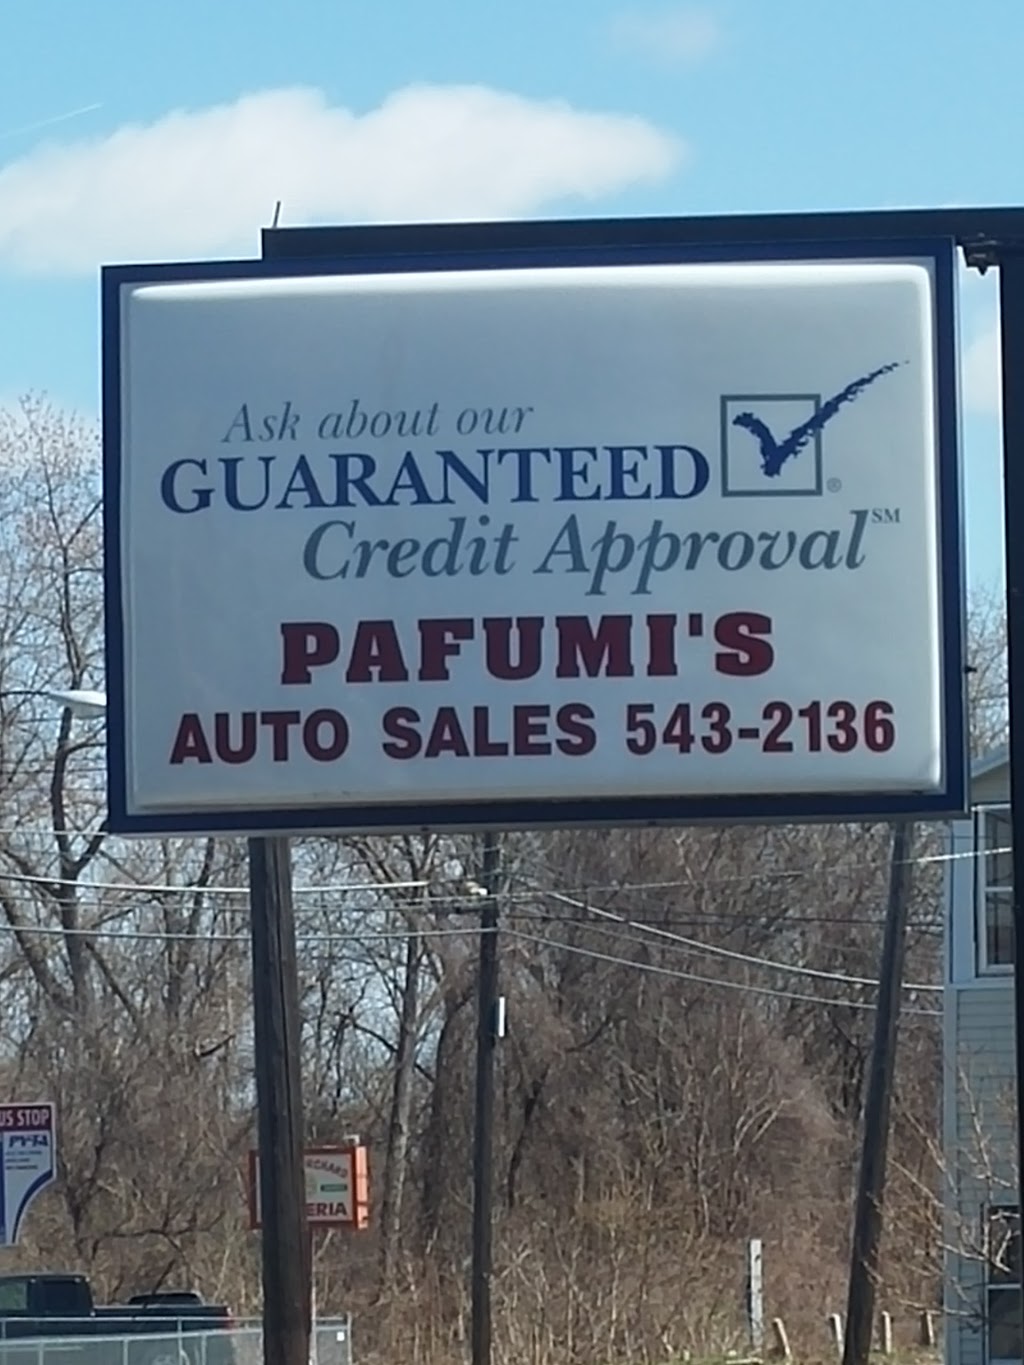 Pafumi State Inspections | 389 Main St, Indian Orchard, MA 01151 | Phone: (413) 543-0024